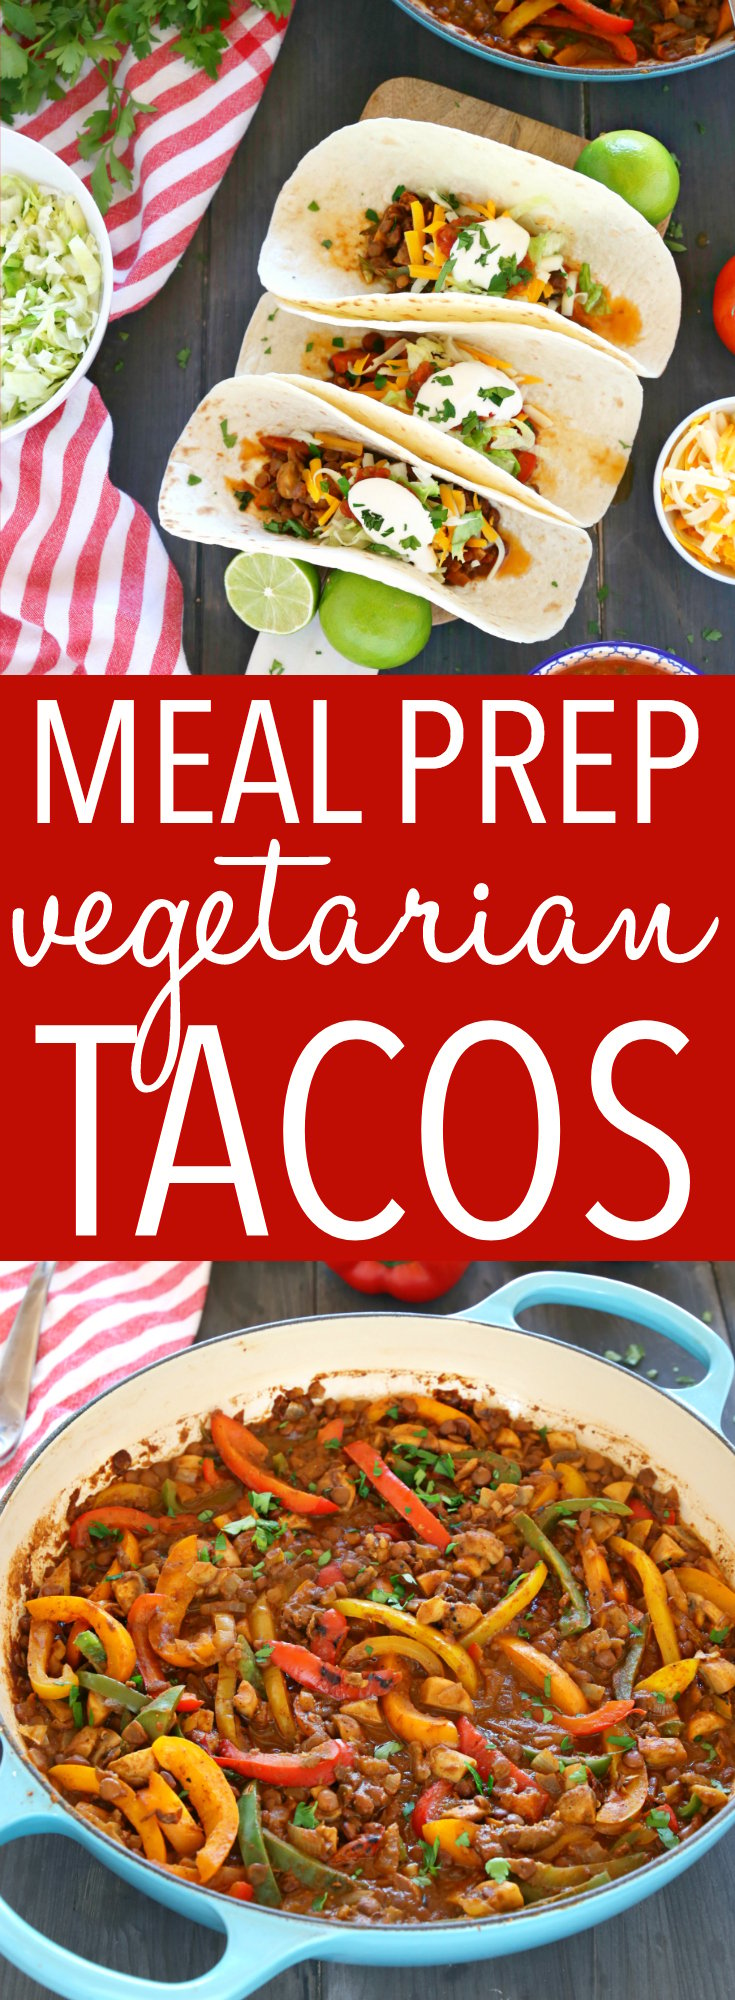 These Meal Prep Vegetarian Tacos are the perfect healthy meal prep solution for busy weeks! Make this delicious, family friendly veggie packed lentil taco filling and serve it in soft tacos, over salad, in lettuce wraps, and even for breakfast! [ad] Recipe from thebusybaker.ca! #LoveLentils #getPrepped #vegetariantacos #easyvegetarianrecipe via @busybakerblog